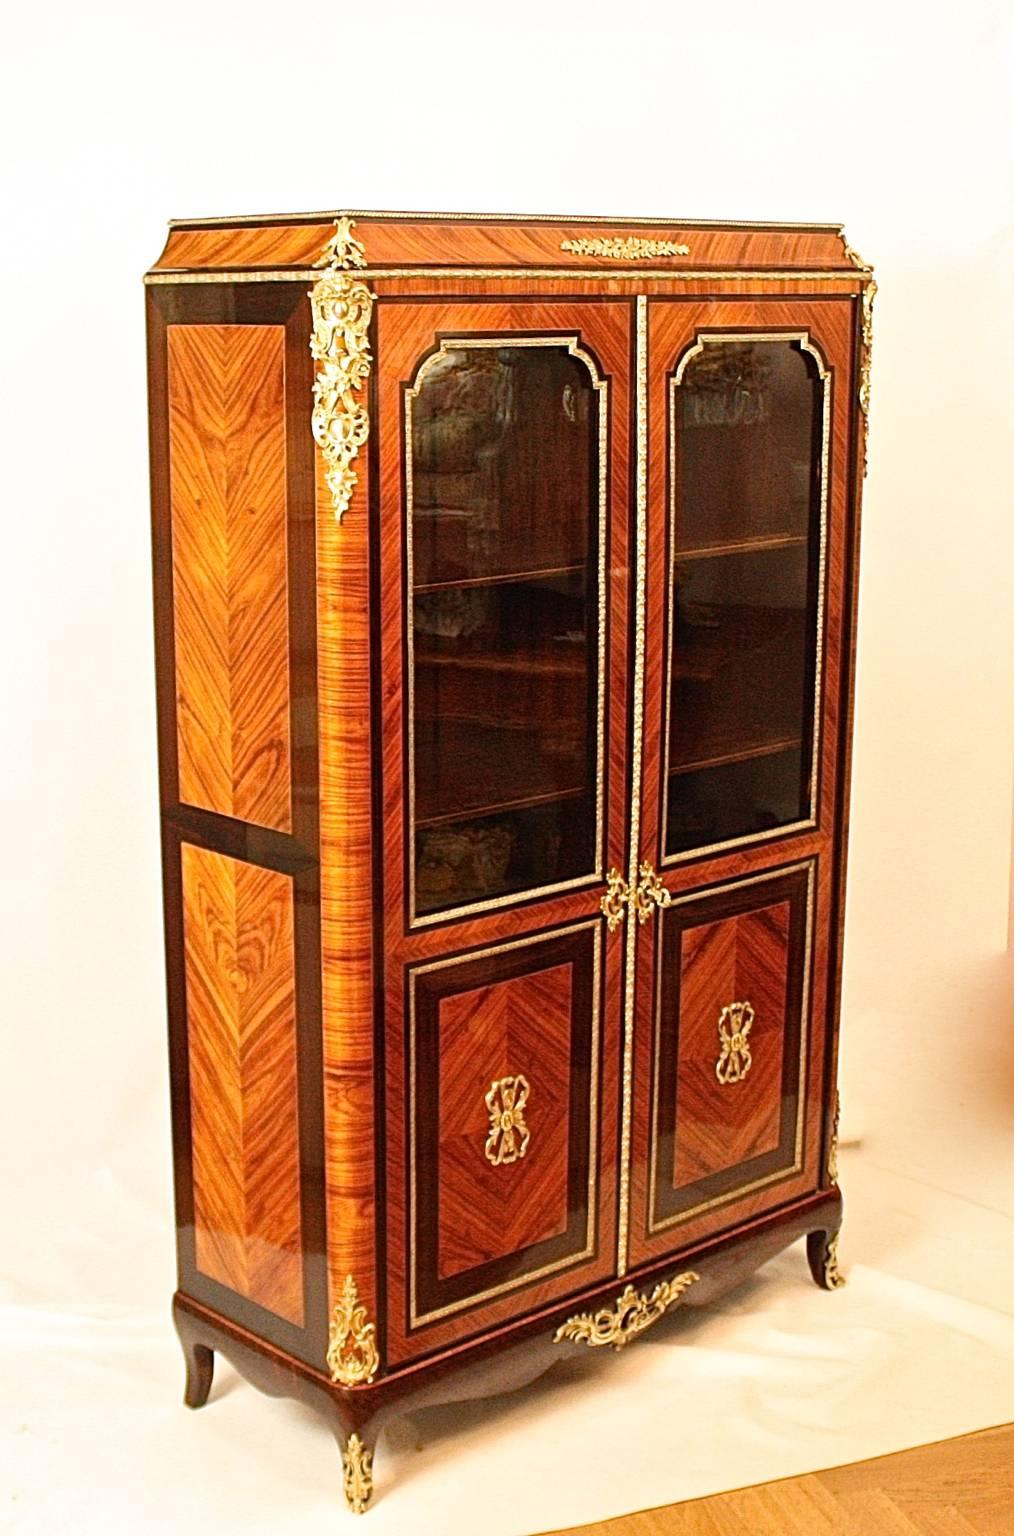 A 19th century Napoleon III Kingwood and Amaranth Vitrine/ Bibiotheque in the Louis XV/XVI transitional style, the veneered top above an arched cornice with central and corner gilt bronze mounts, enclosed by a pair of glazed quarter veneered panel